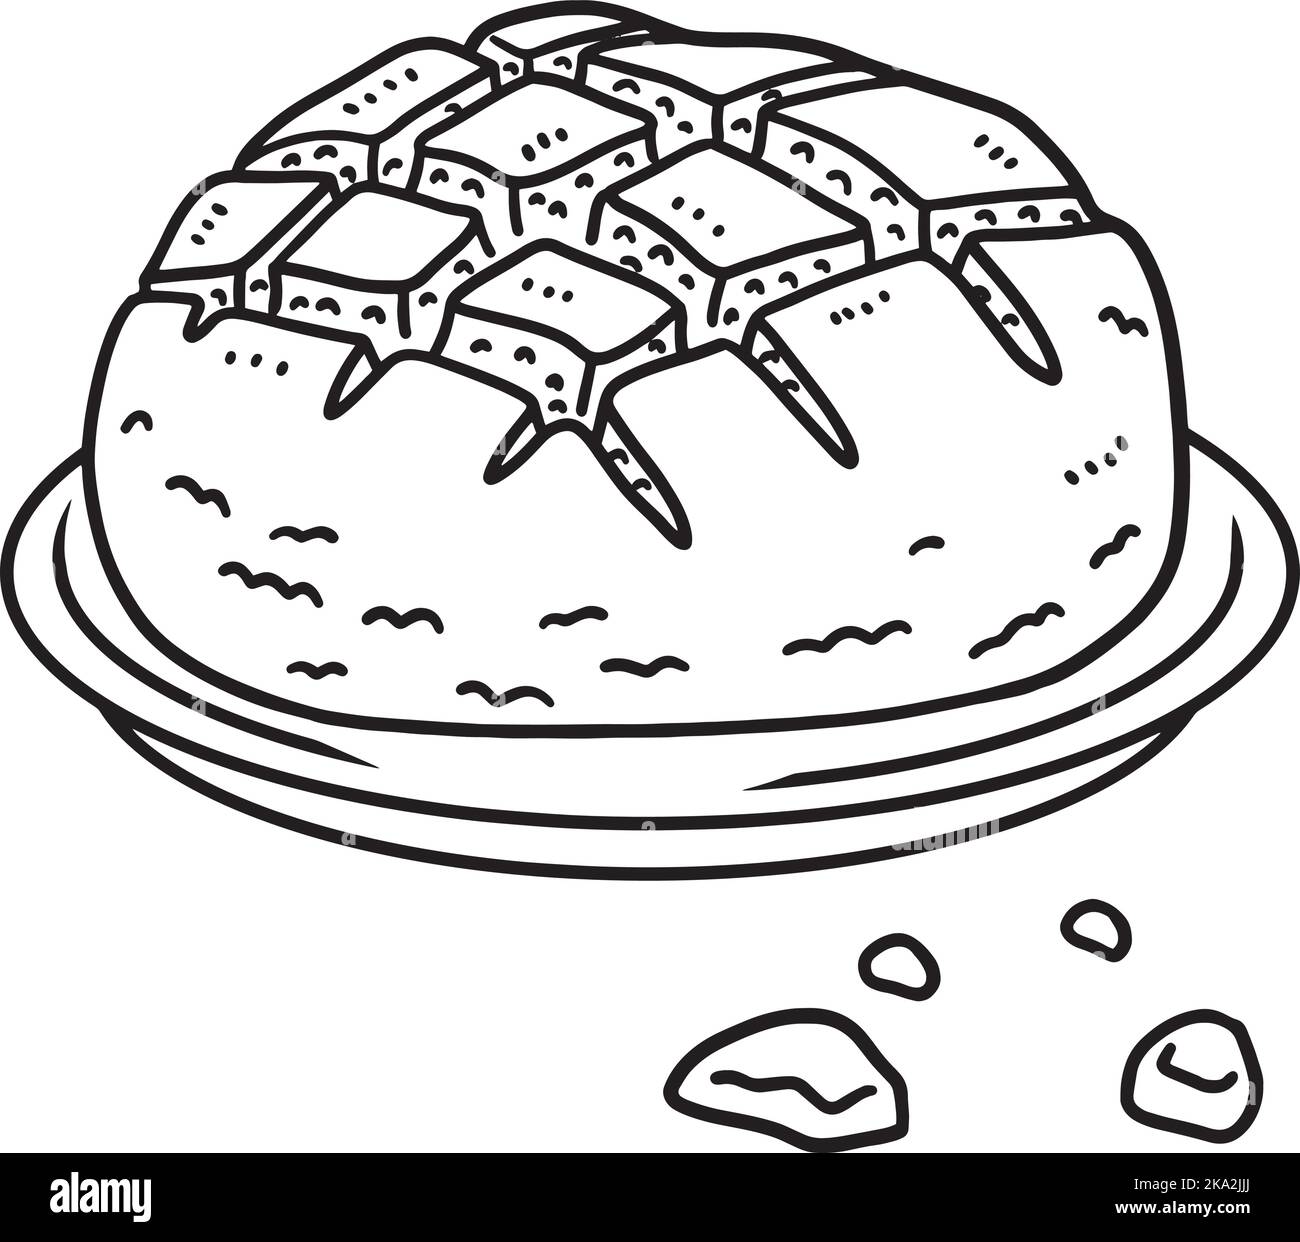 Irish Soda Bread Isolated Coloring Page for Kids Stock Vector